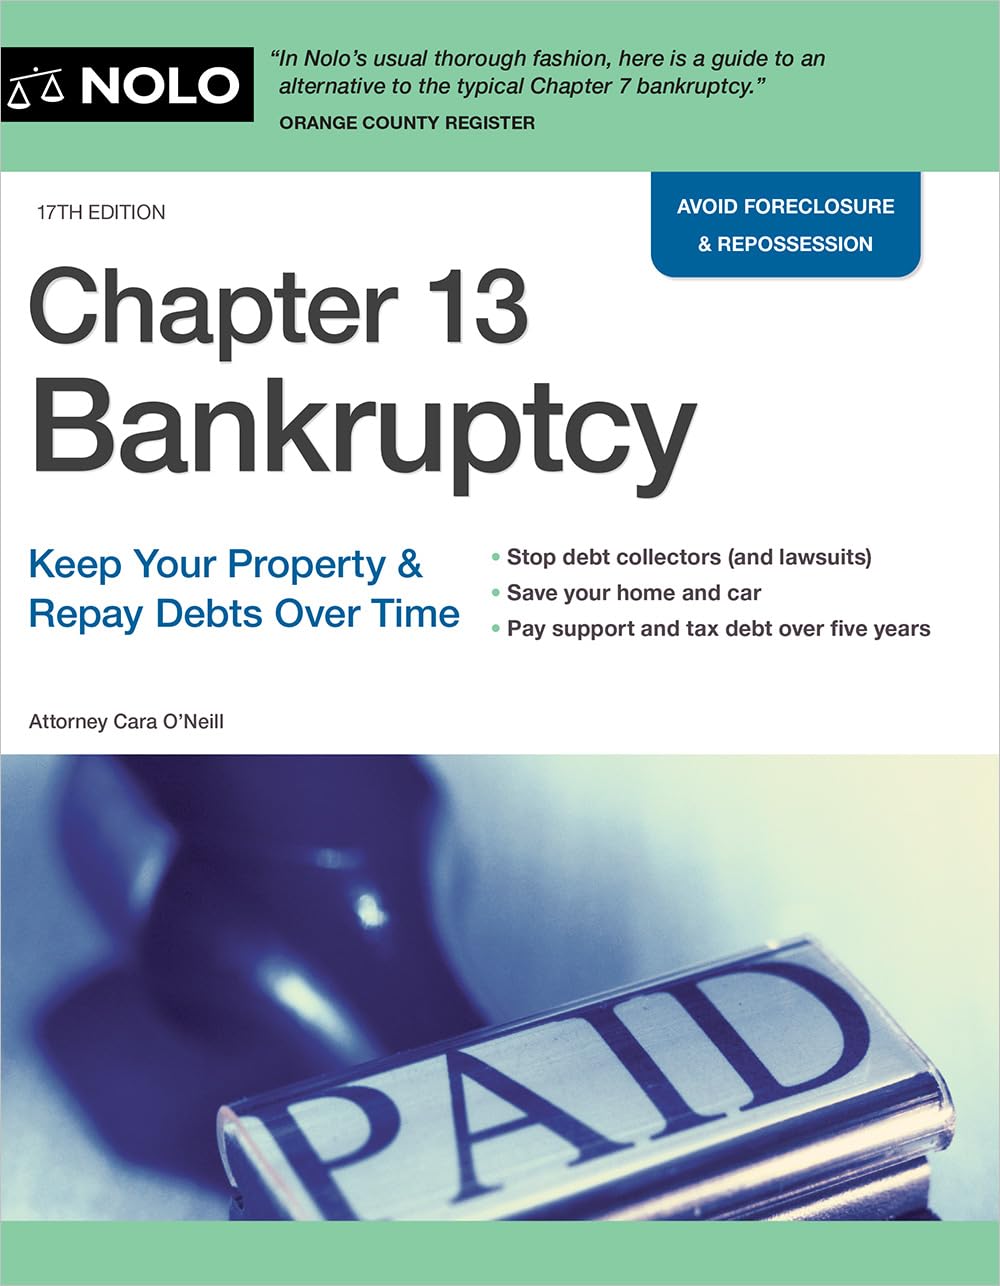 Chapter 13 Bankruptcy: Keep Your Property & Repay Debts Over Time (17TH ed.) - SureShot Books Publishing LLC